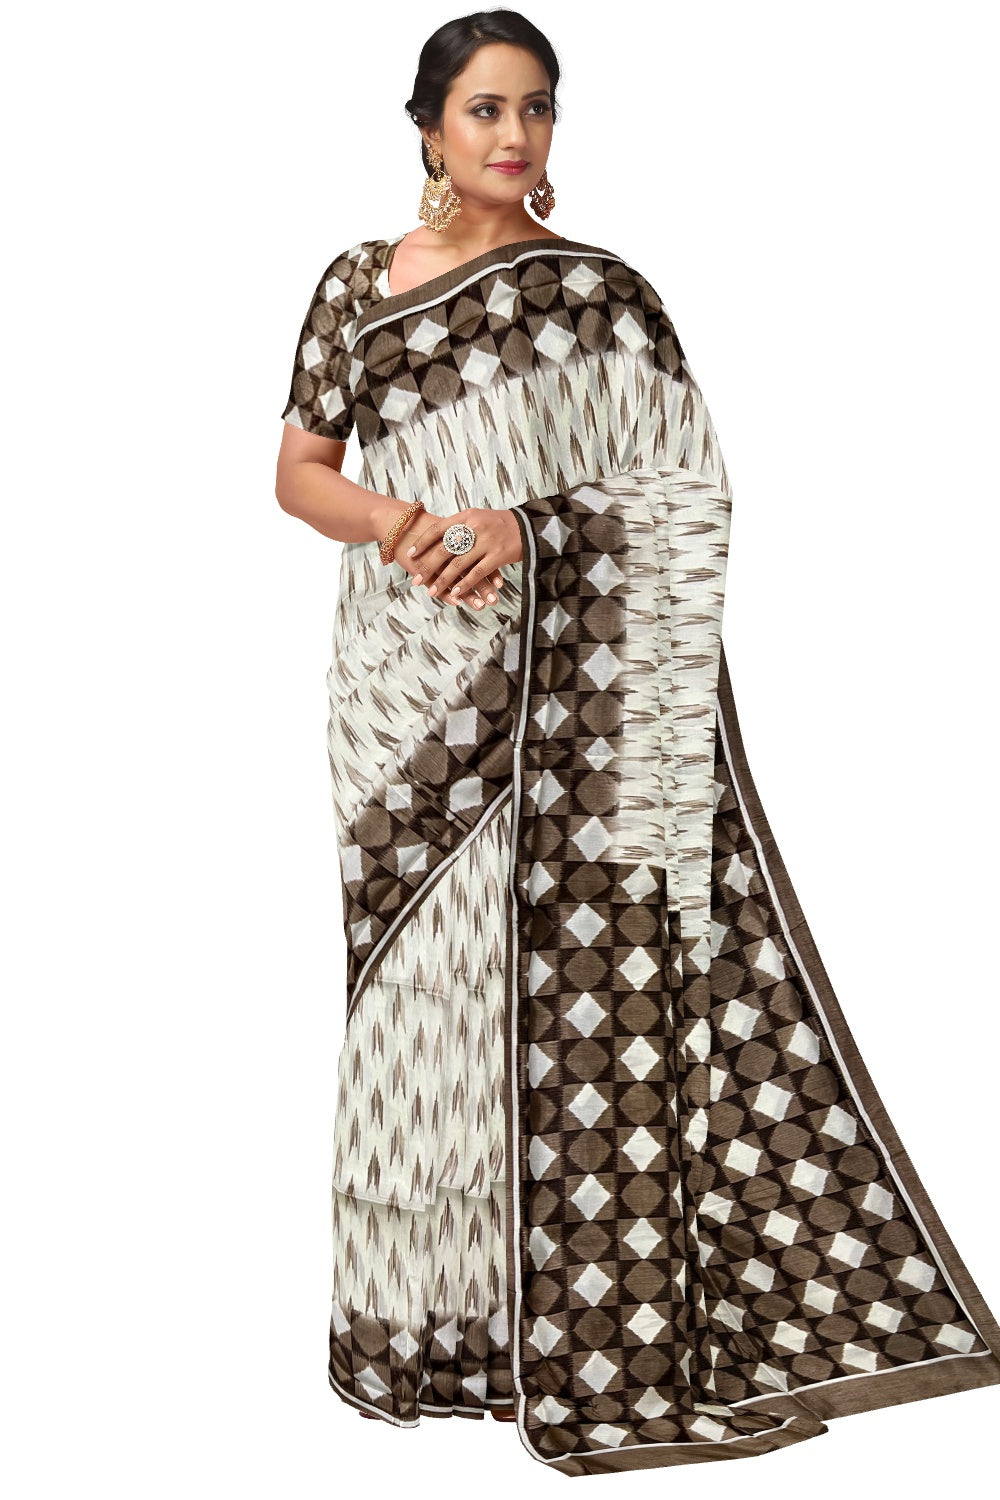 Southloom White and Brown Semi Tussar Designer Saree with Tassels